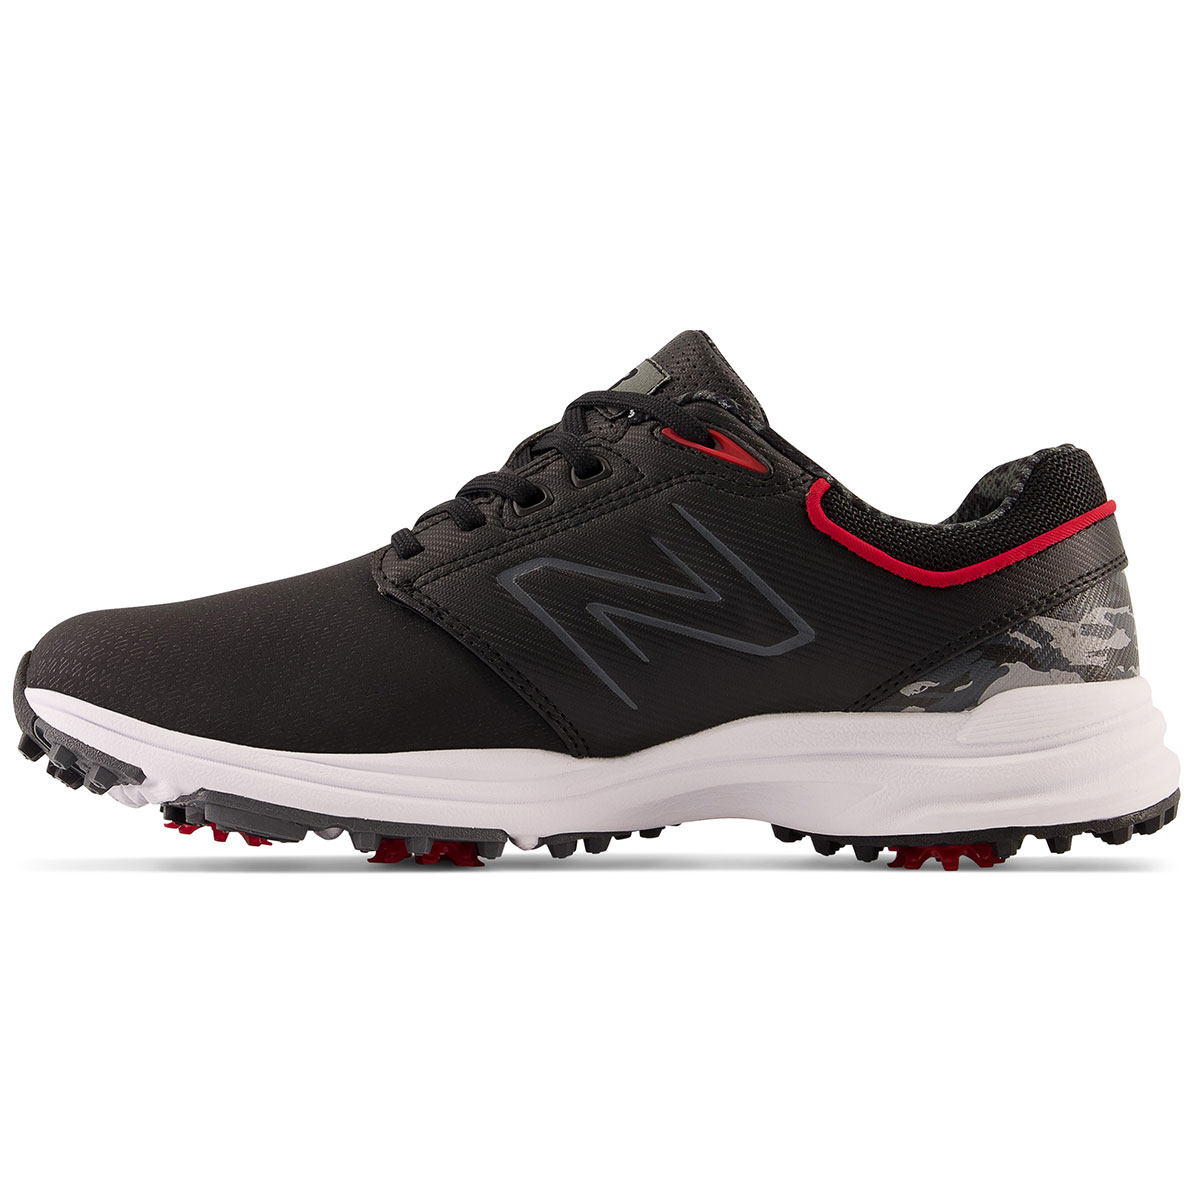 New Balance Men's Brighton Waterproof Spiked Golf Shoes from american golf